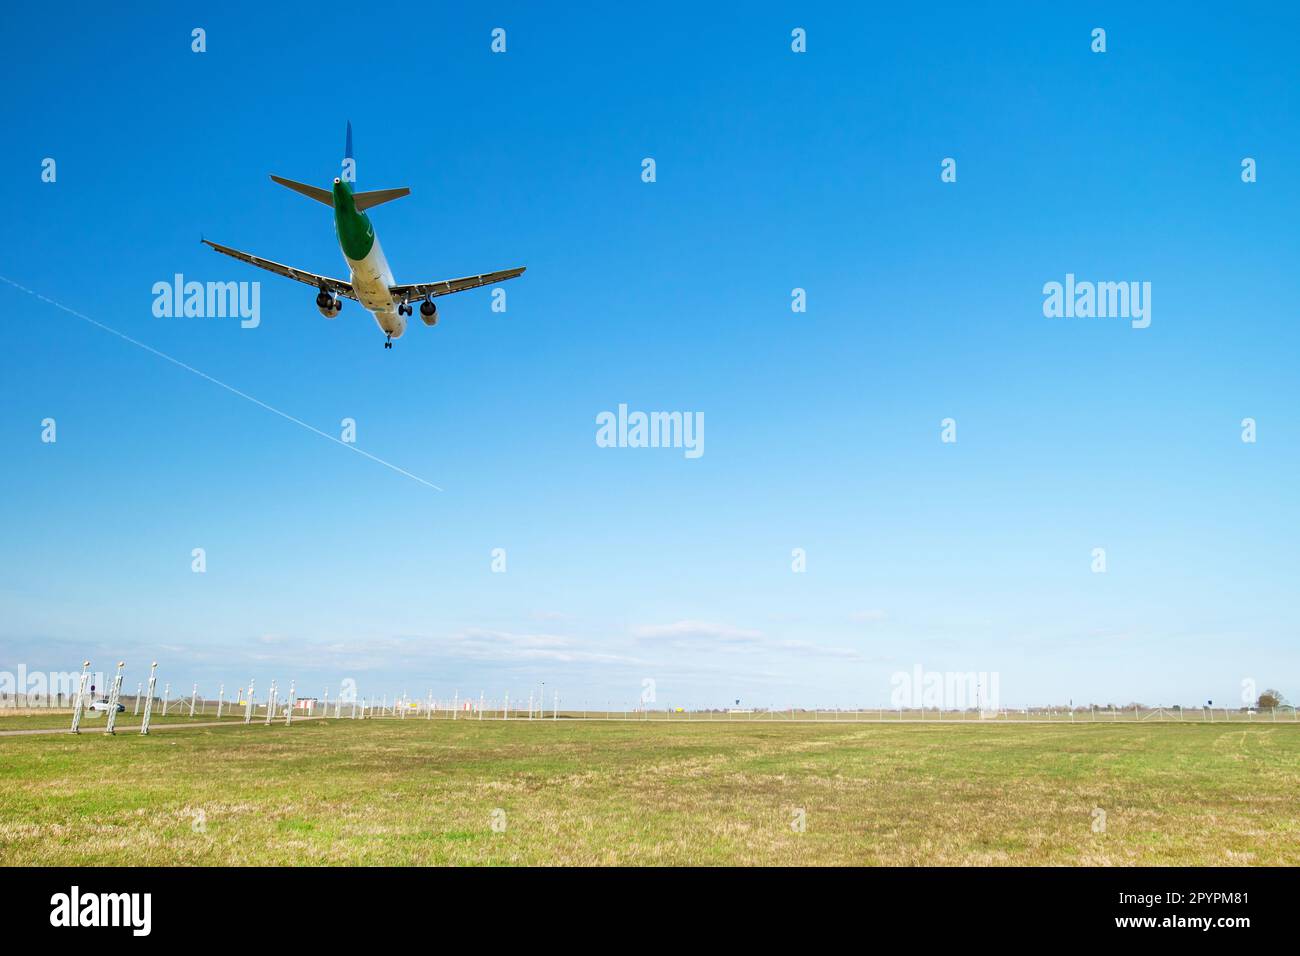 Landing of a commercial aircraft while aproaching airport Stock Photo